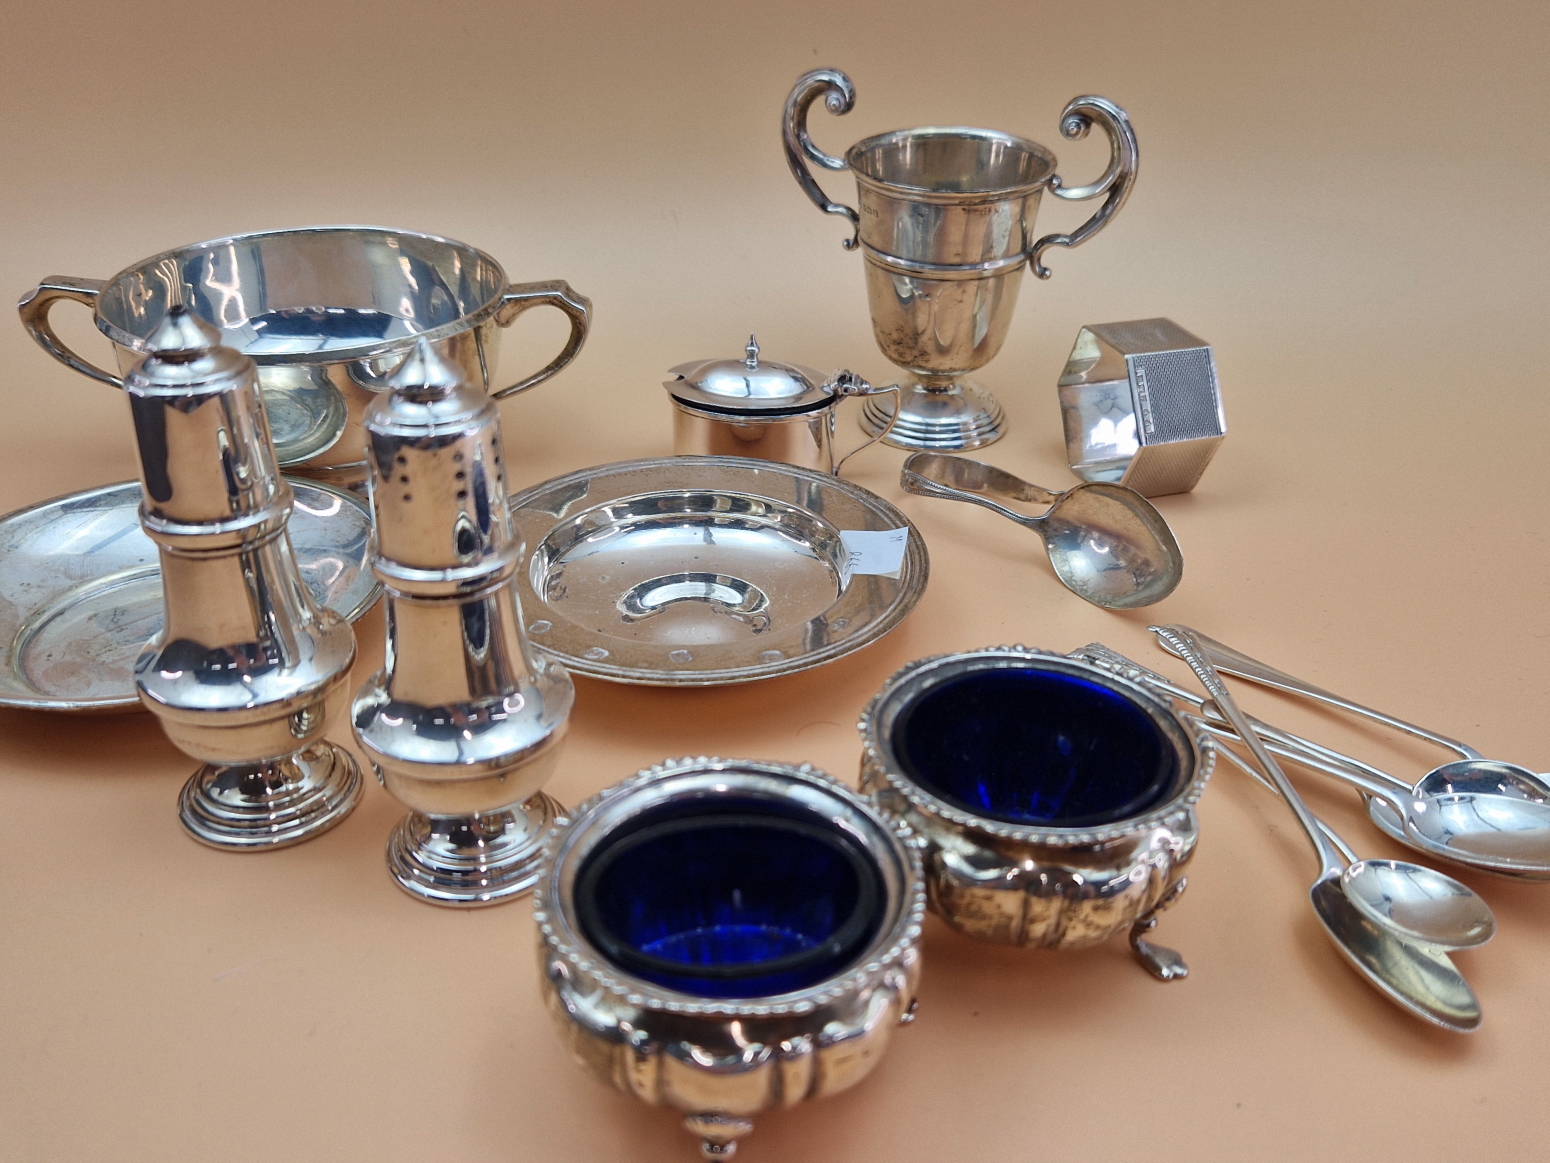 MISCELLANEOUS 20th C. SILVER, TO INCLUDE CRUETS, A TWO HANDLED BOWL, A TROPHY CUP, TEA SPOONS AND